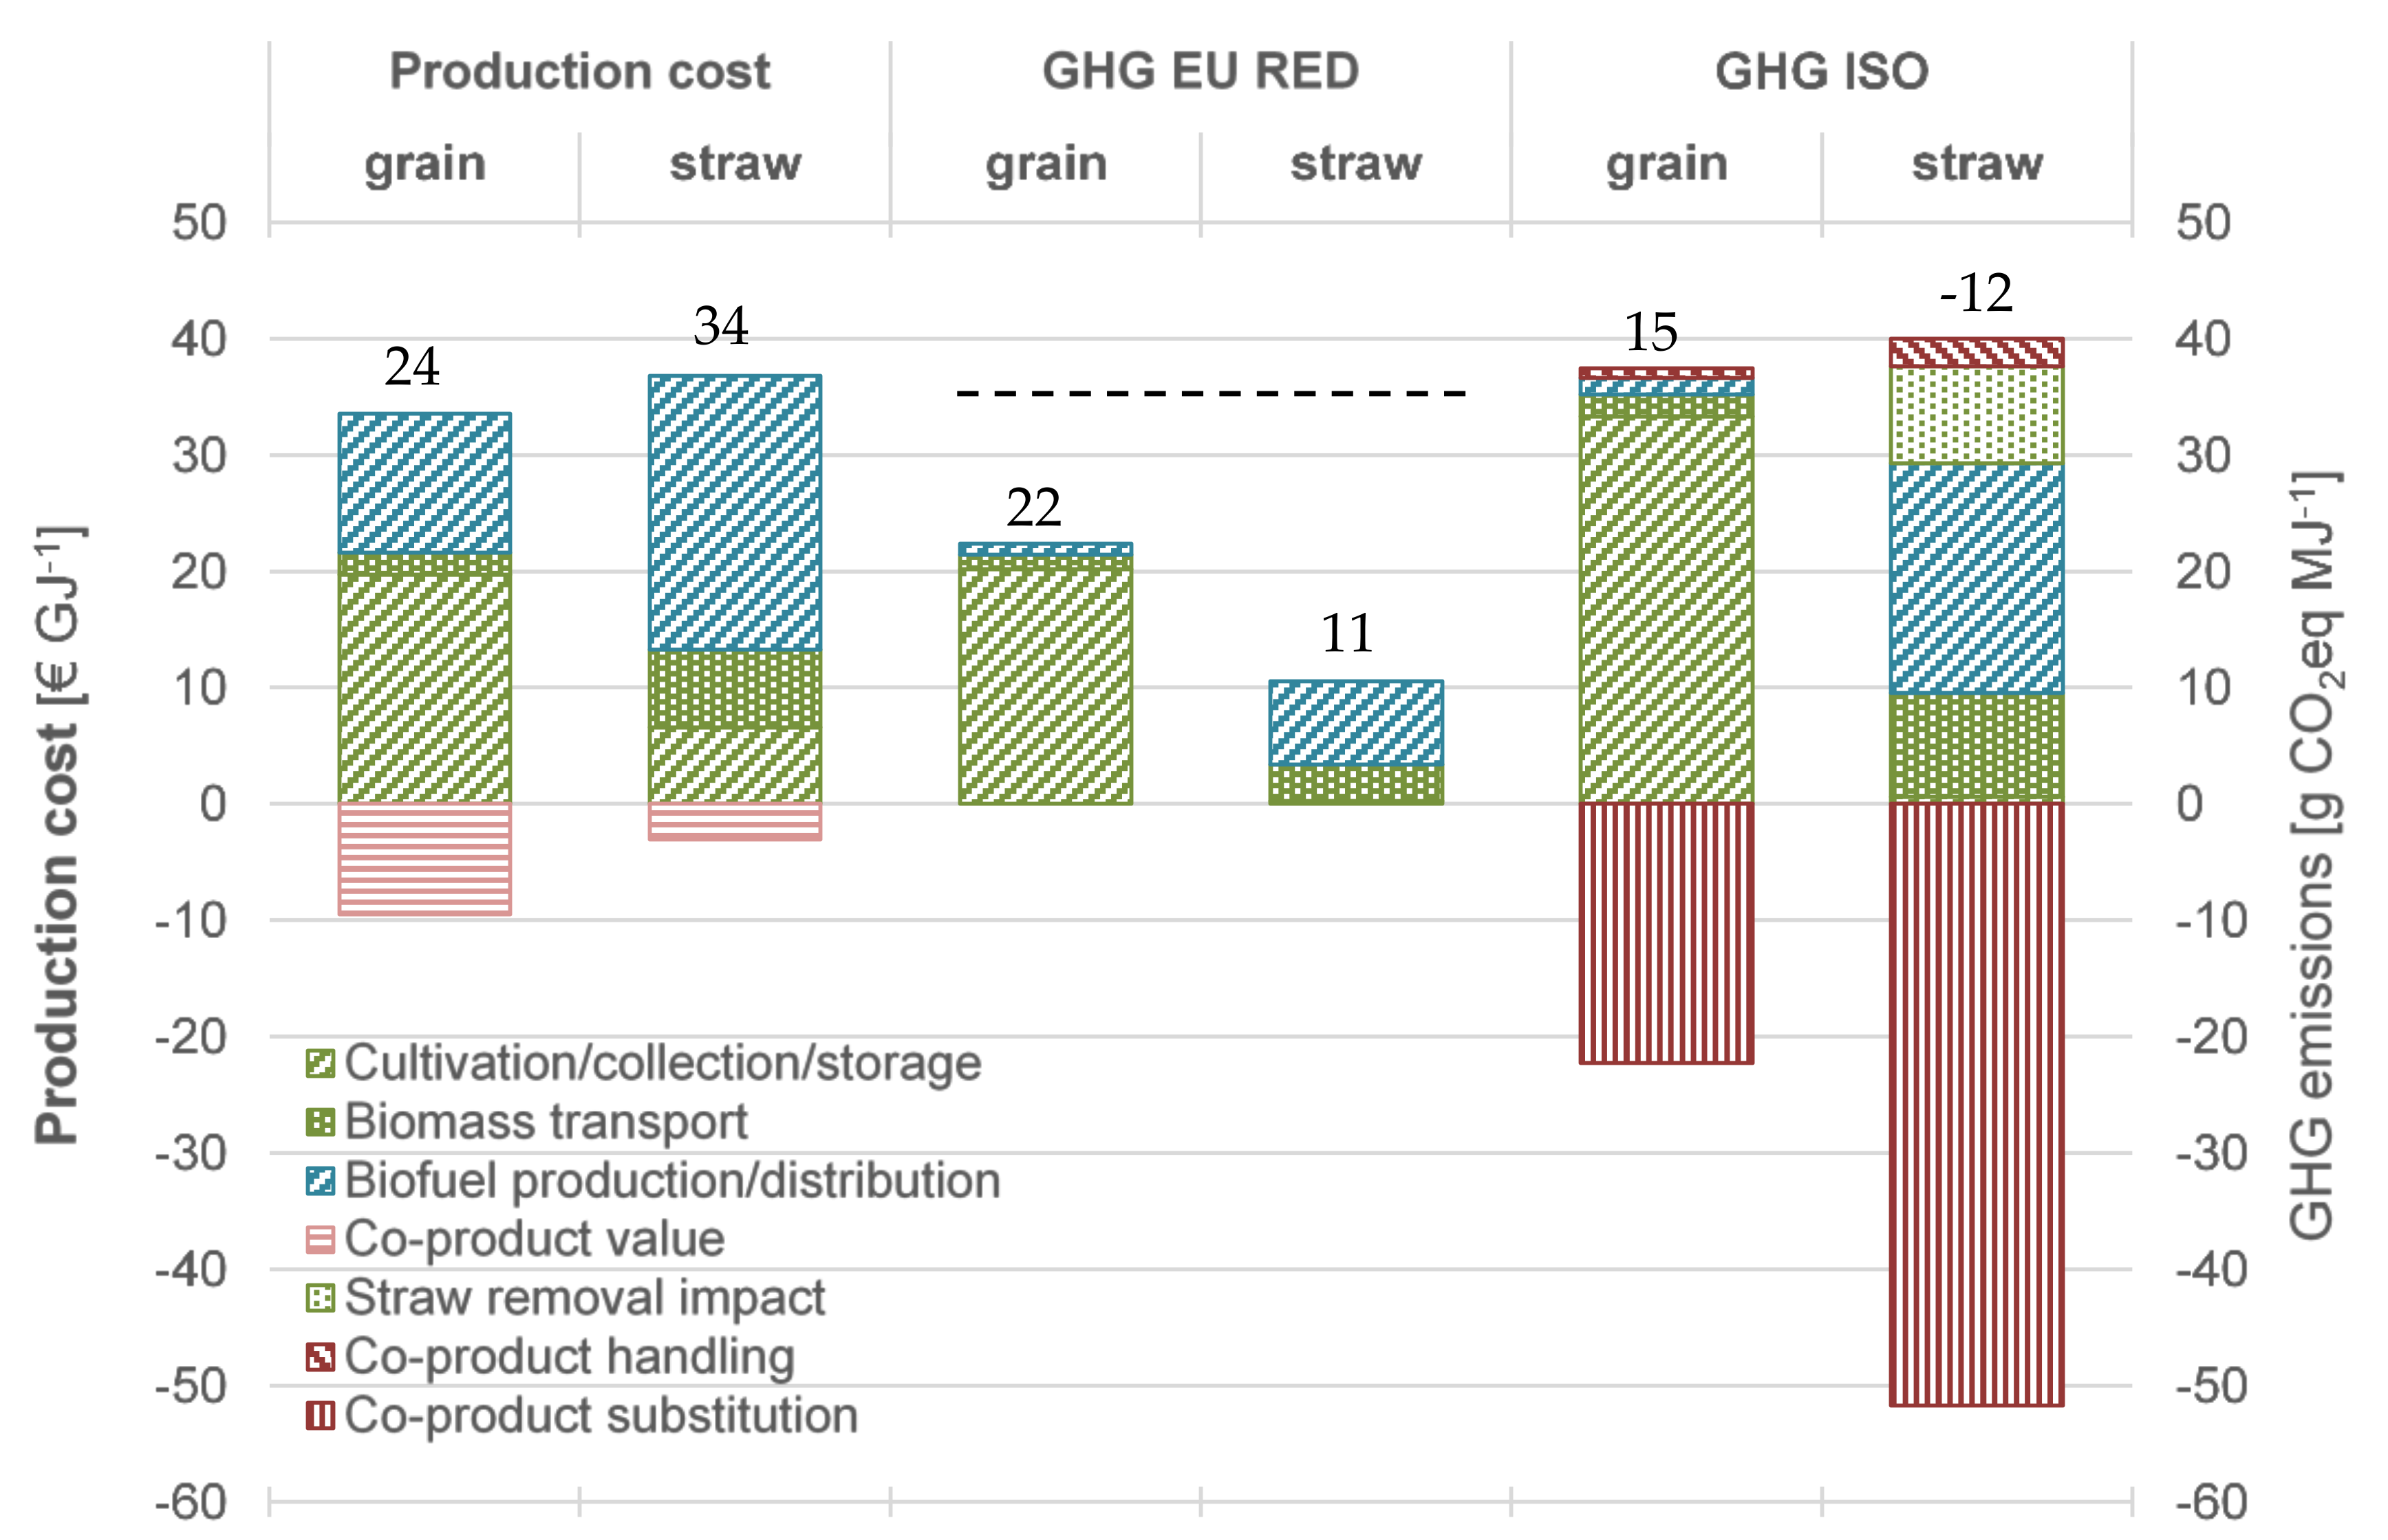 Energies Free Full Text Biogas And Ethanol From Wheat Grain Or Straw Is There A Trade Off Between Climate Impact Avoidance Of Iluc And Production Cost Html